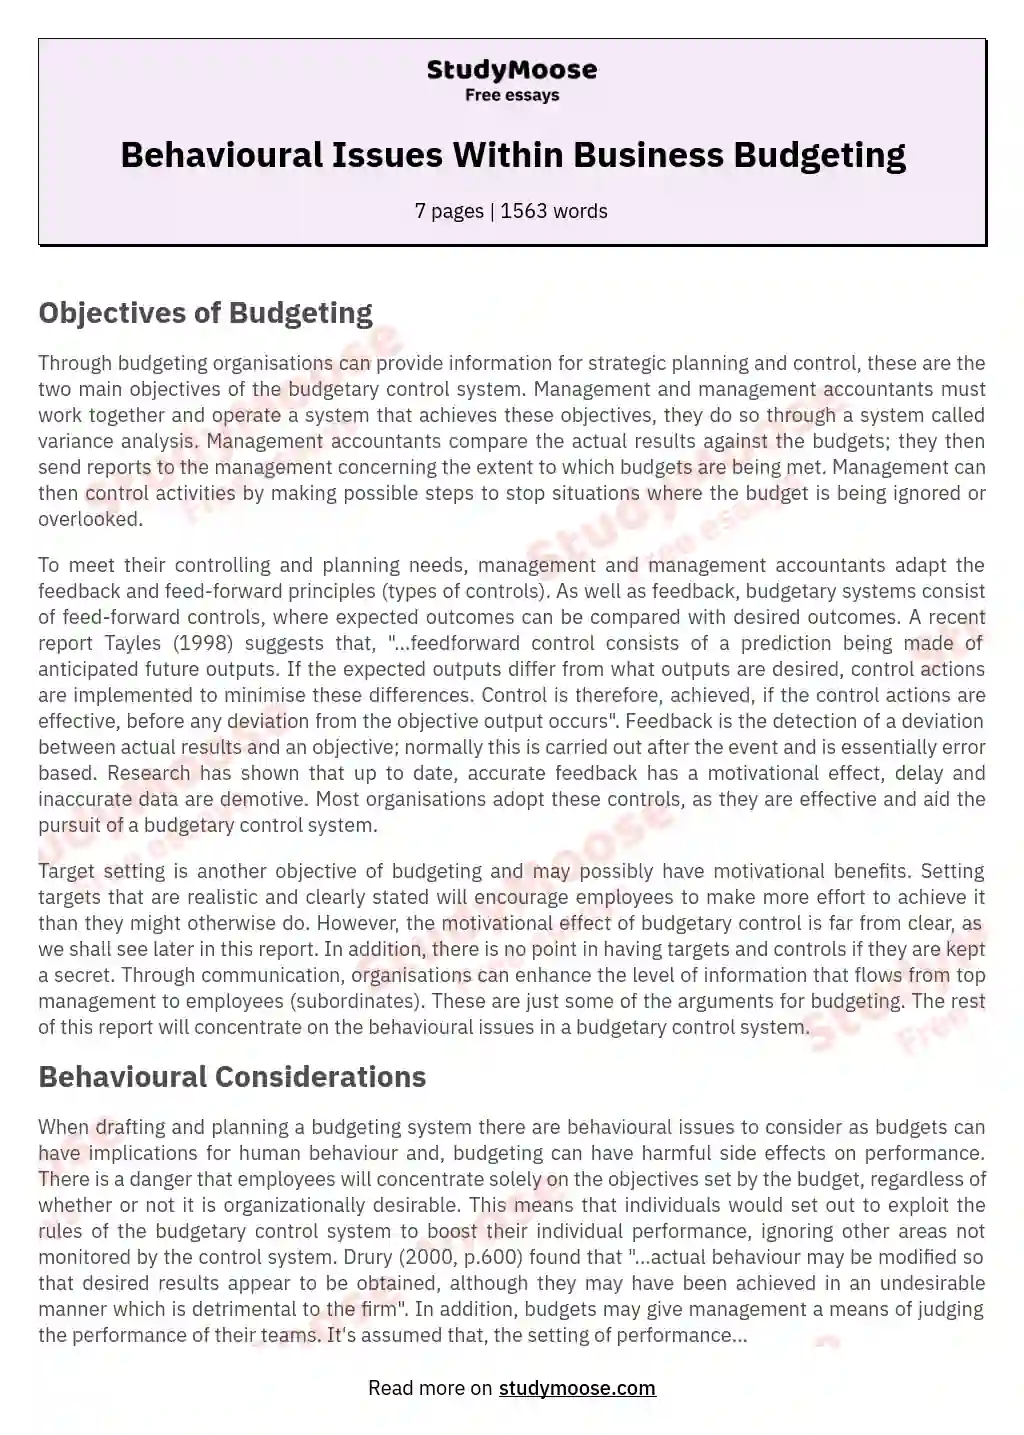 Behavioural Issues Within Business Budgeting